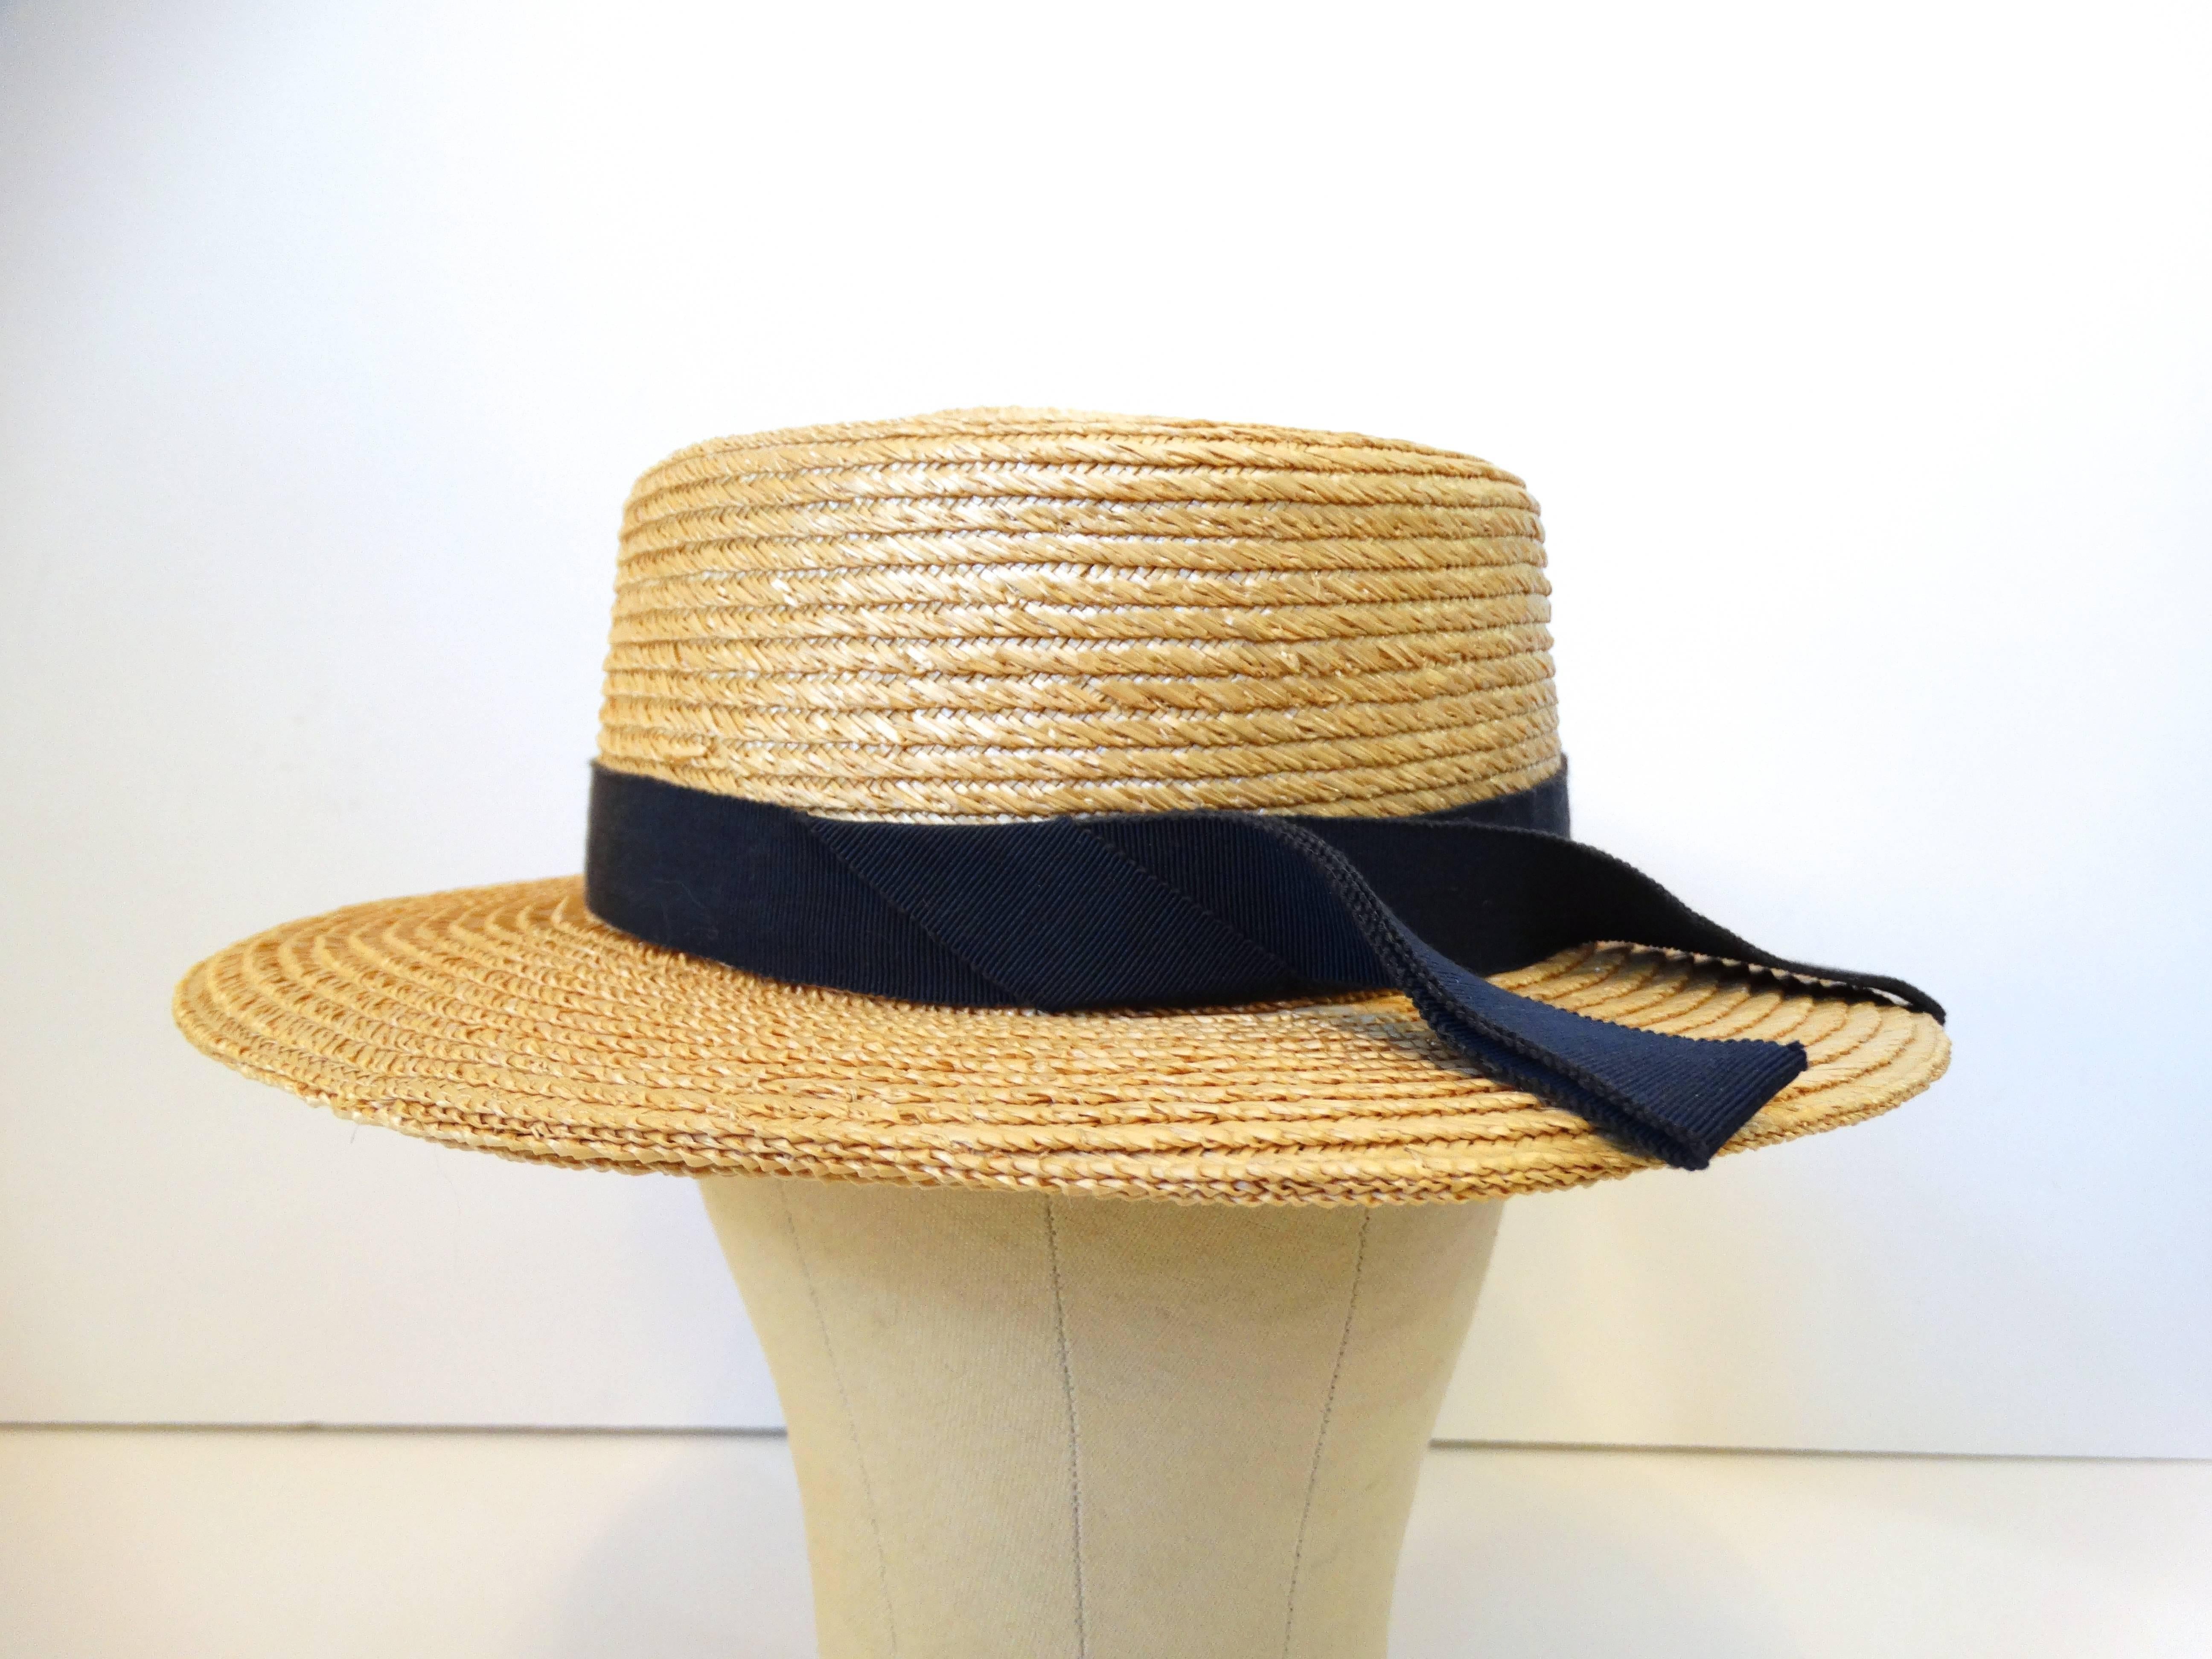 Rare 1980's Yves Saint Laurent Rive Gauche boater straw hat with a contrasting navy ribbon. Made In France. Style/model A458 Measures: 14